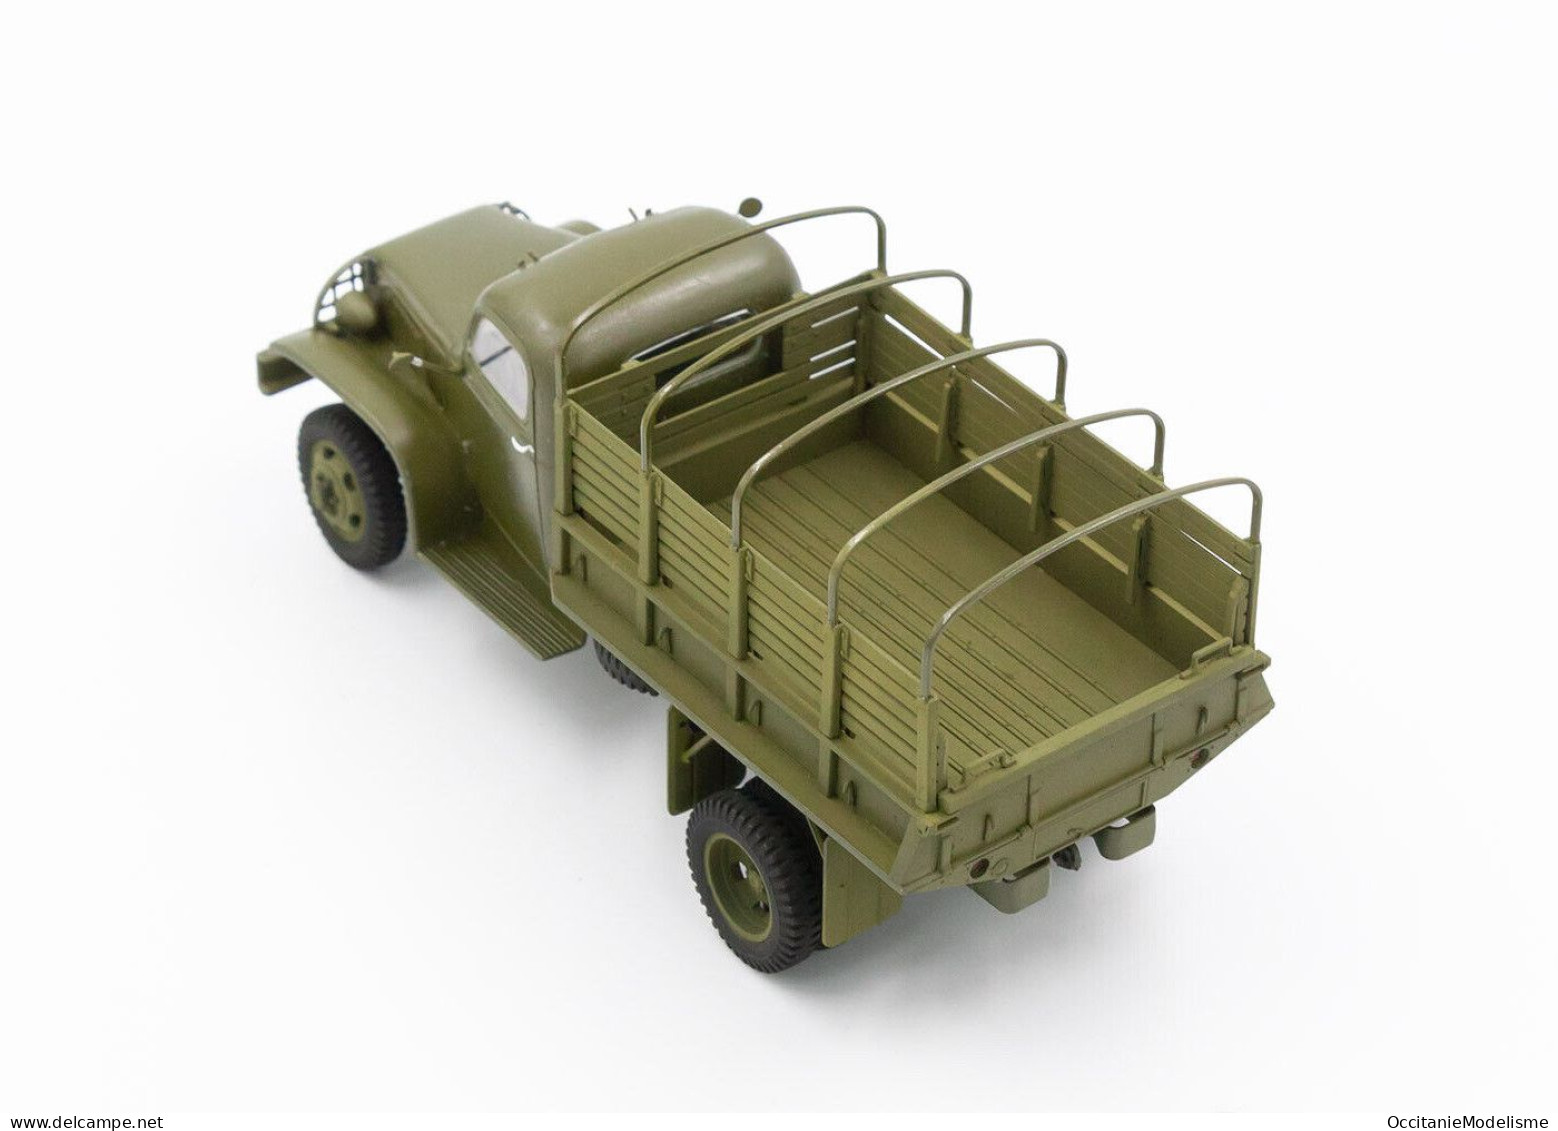 ICM - CHEVROLET G7107 WWII Army Truck Maquette Kit Plastique Réf. 35593 Neuf NBO 1/35 - Vehículos Militares